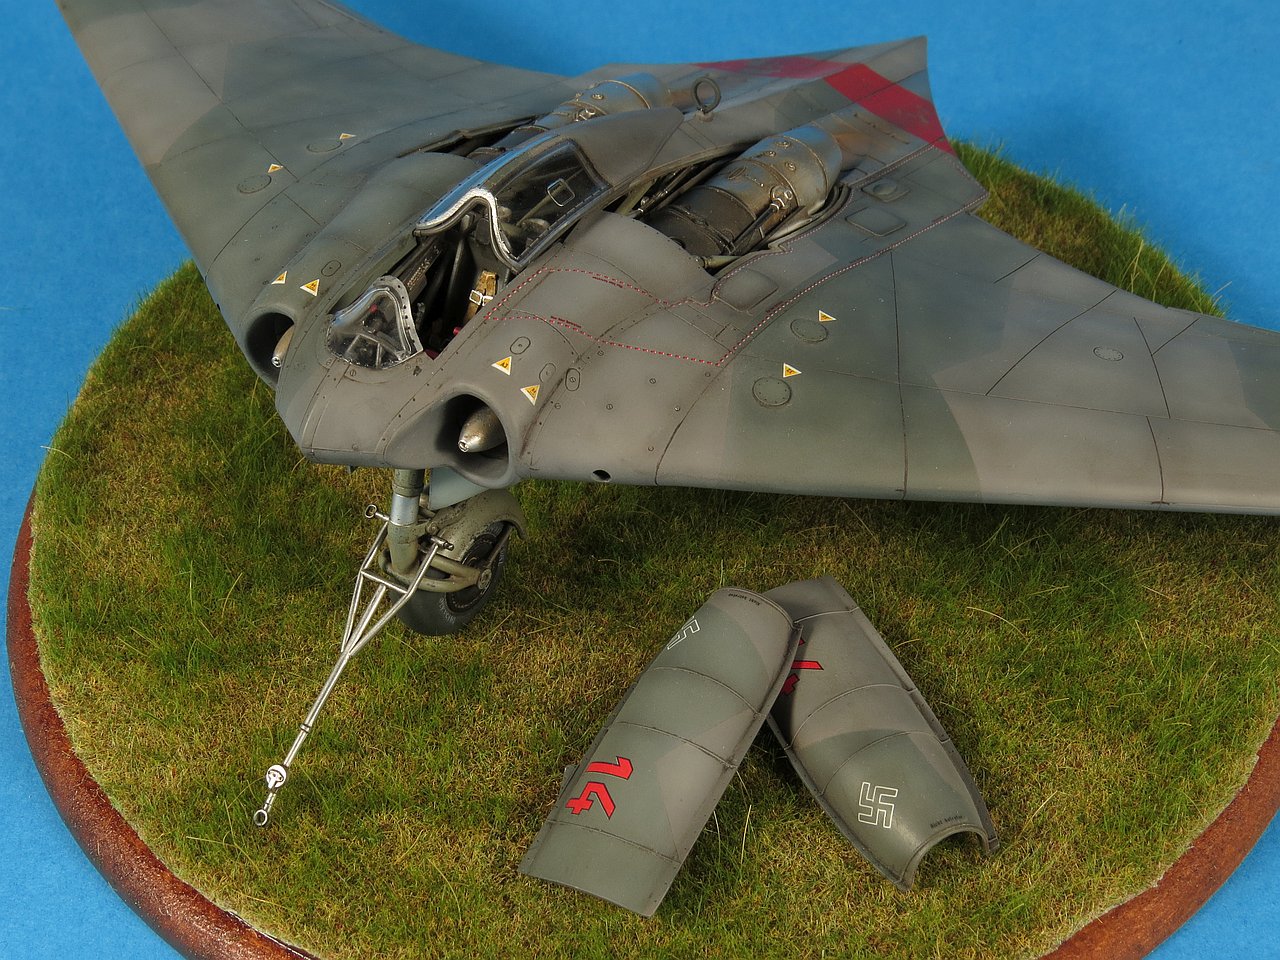 The Modelling News Build Review Pt Iii Zoukei Mura 1 48th Scale Horten Ho 229